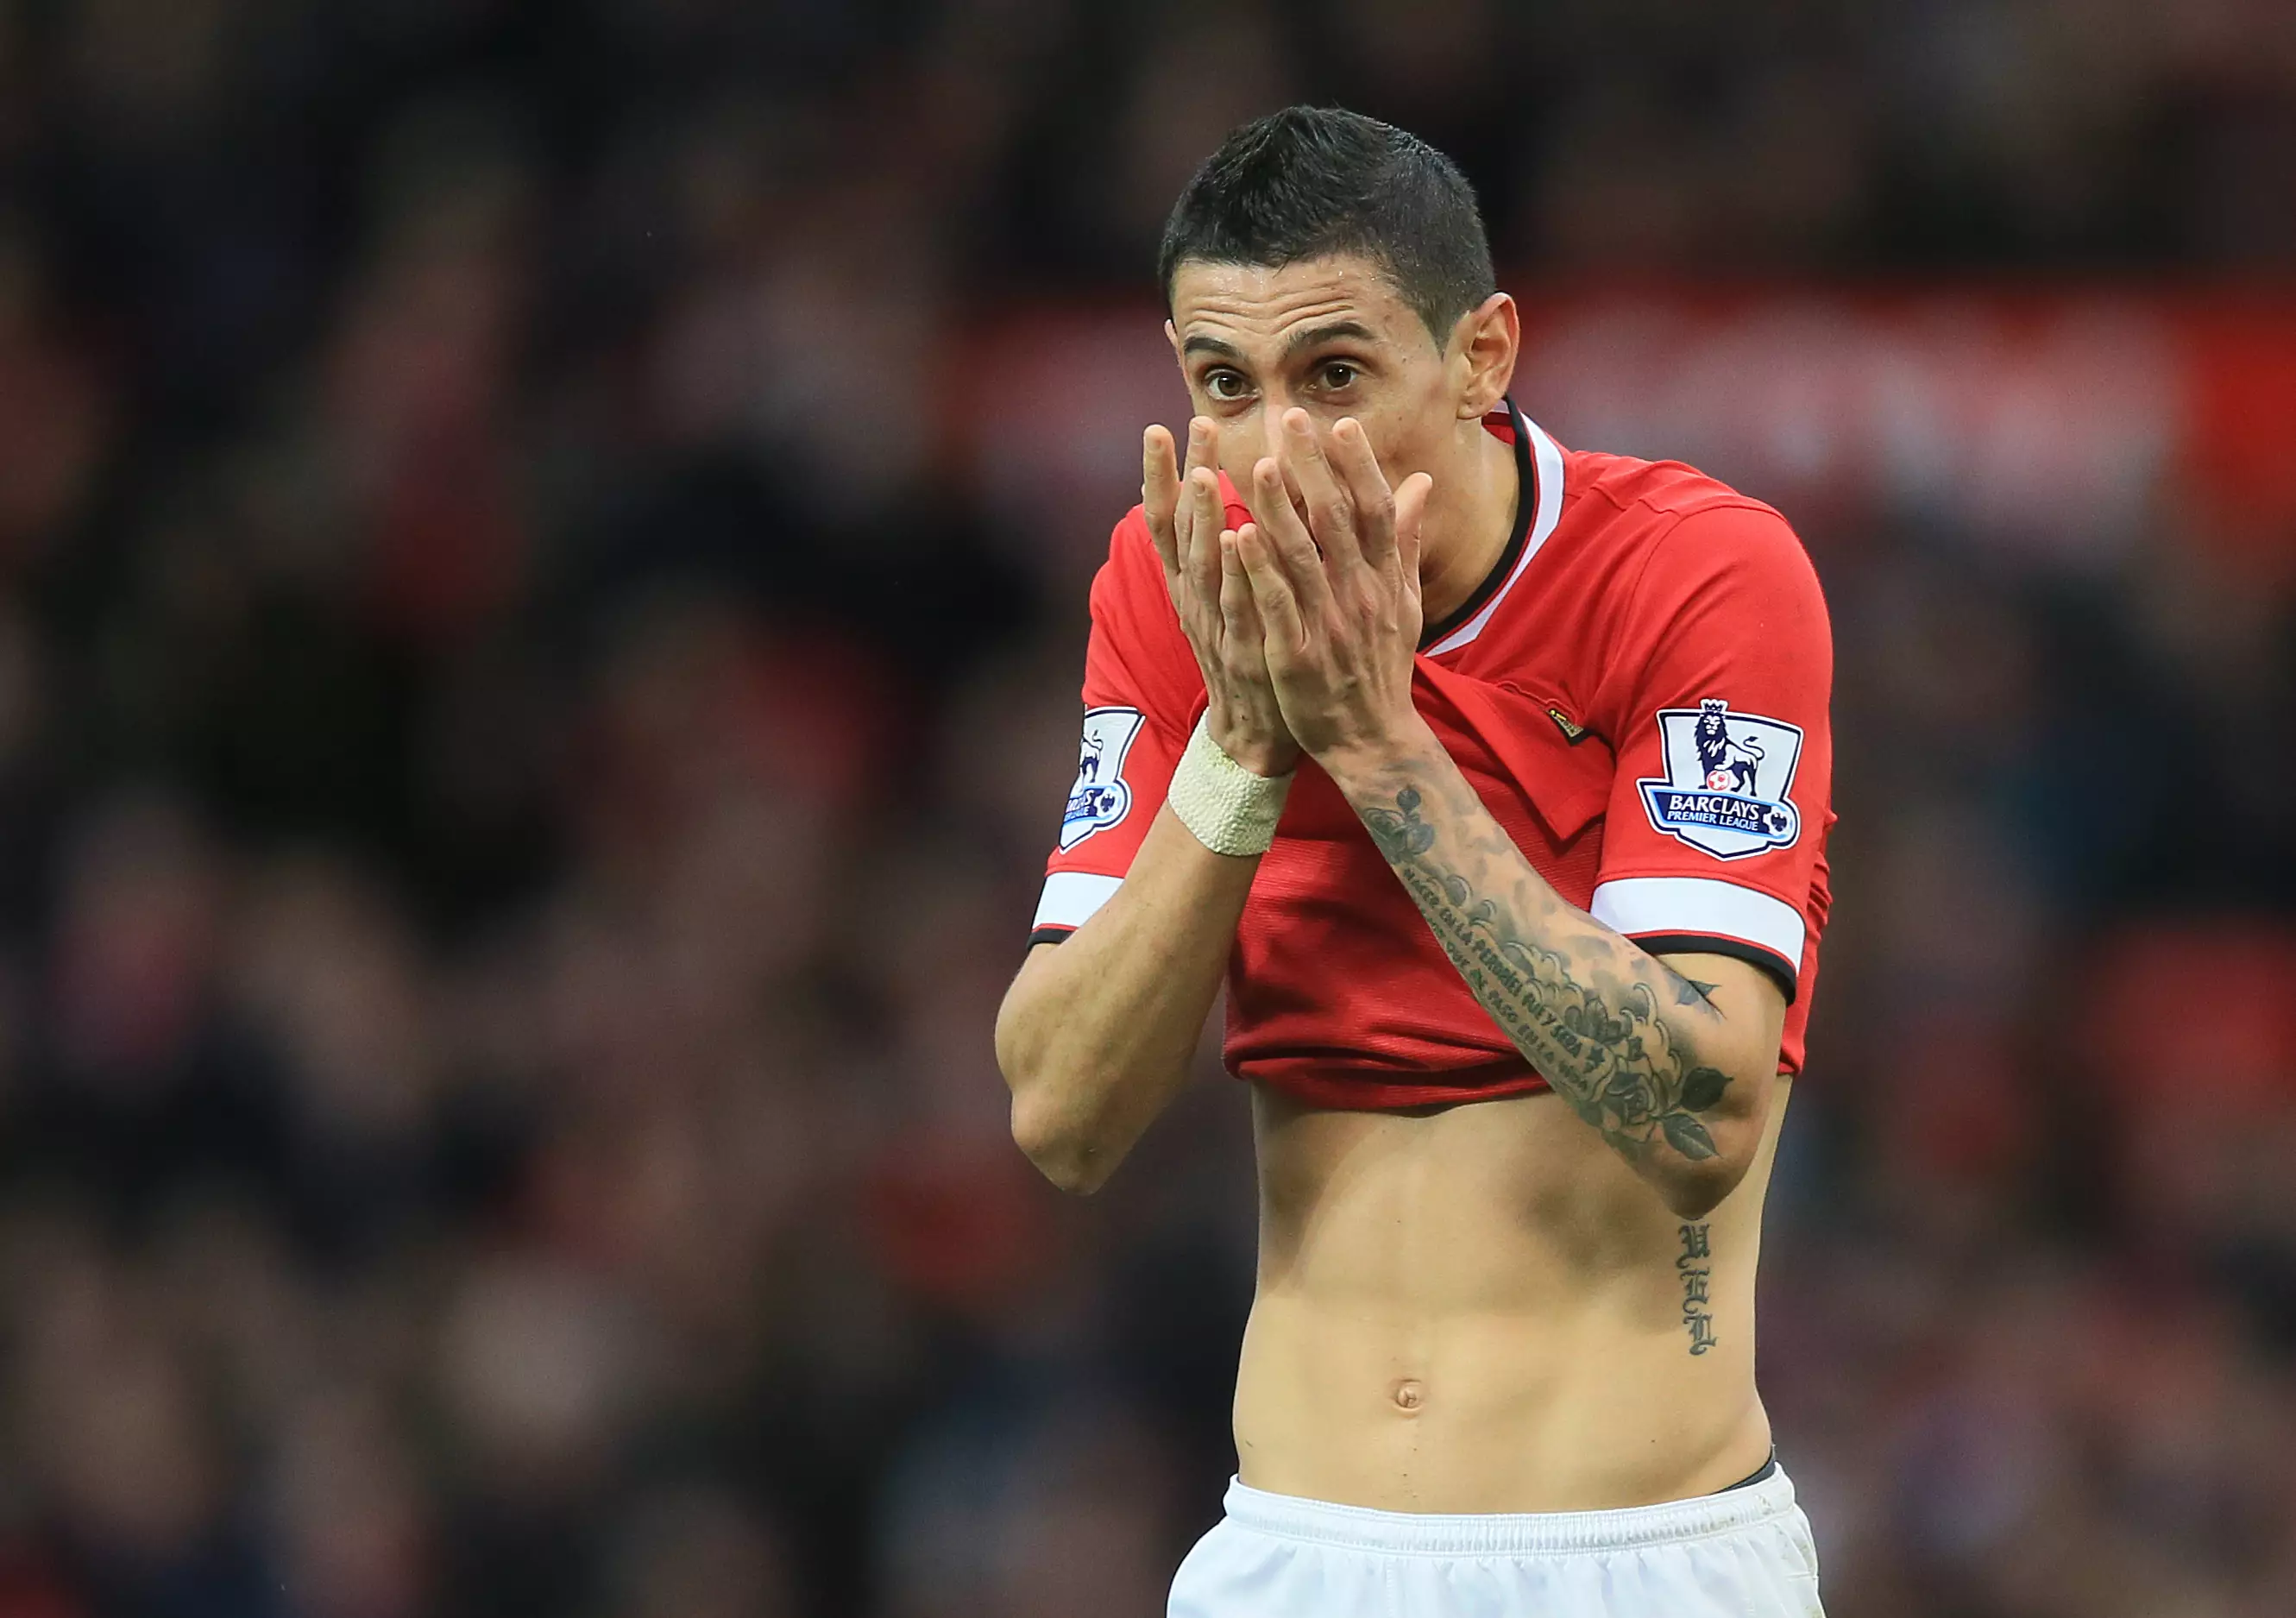 Things started well for Di Maria but by the end of the first season he was a peripheral figure. Image: PA Images